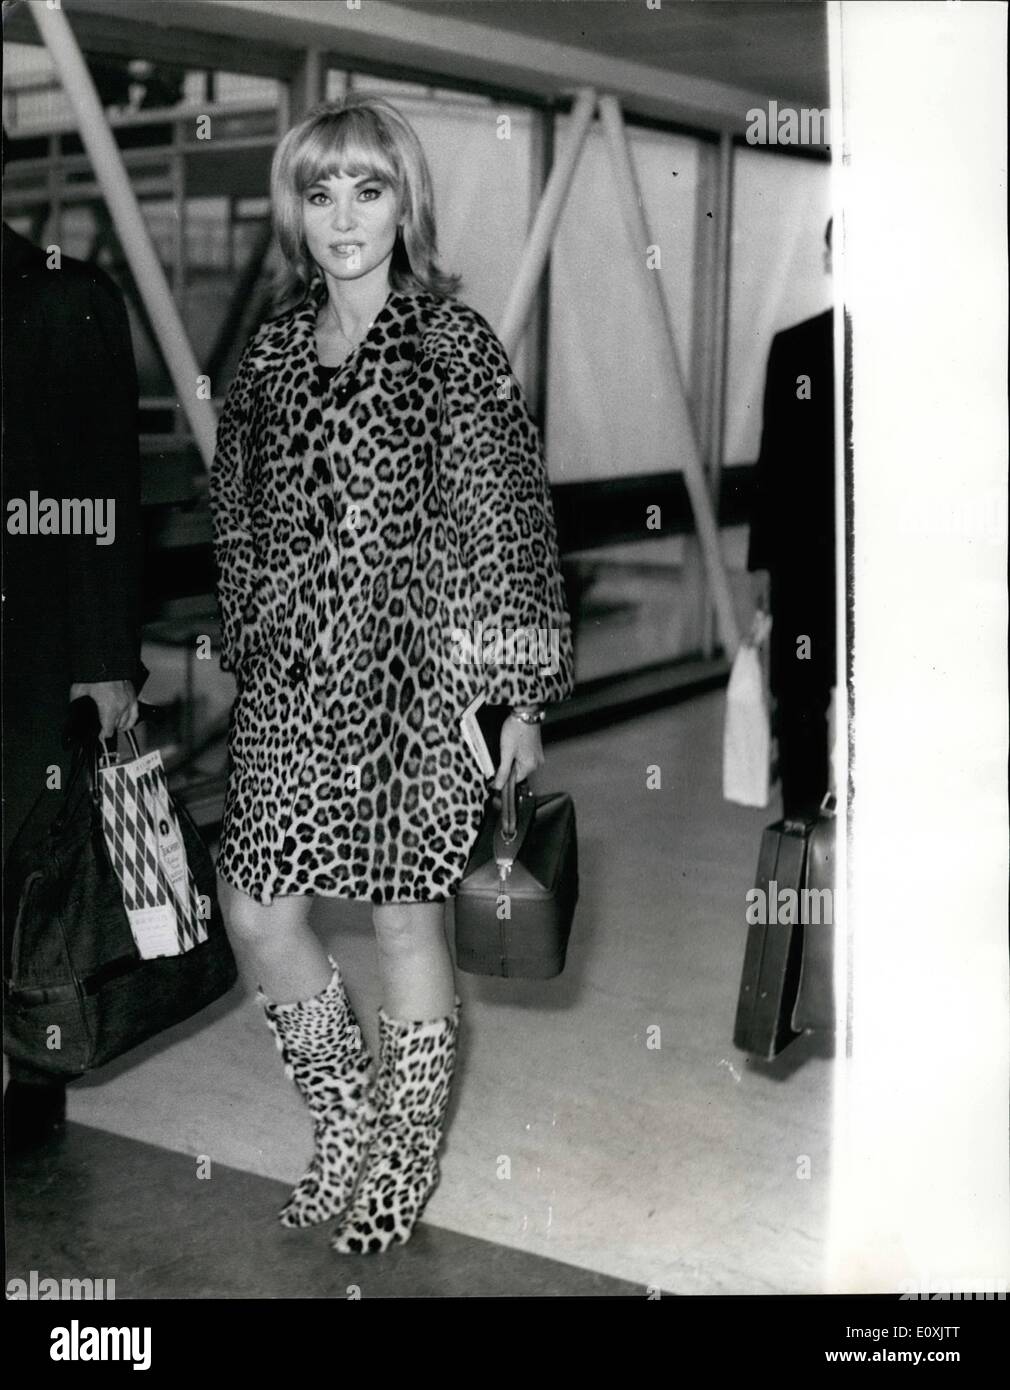 Feb. 02, 1967 - Diane Cilento leaves for U.S. Photo shows: Film actress Diane Cilento, wore this striking outfit, when she left Stock Photo